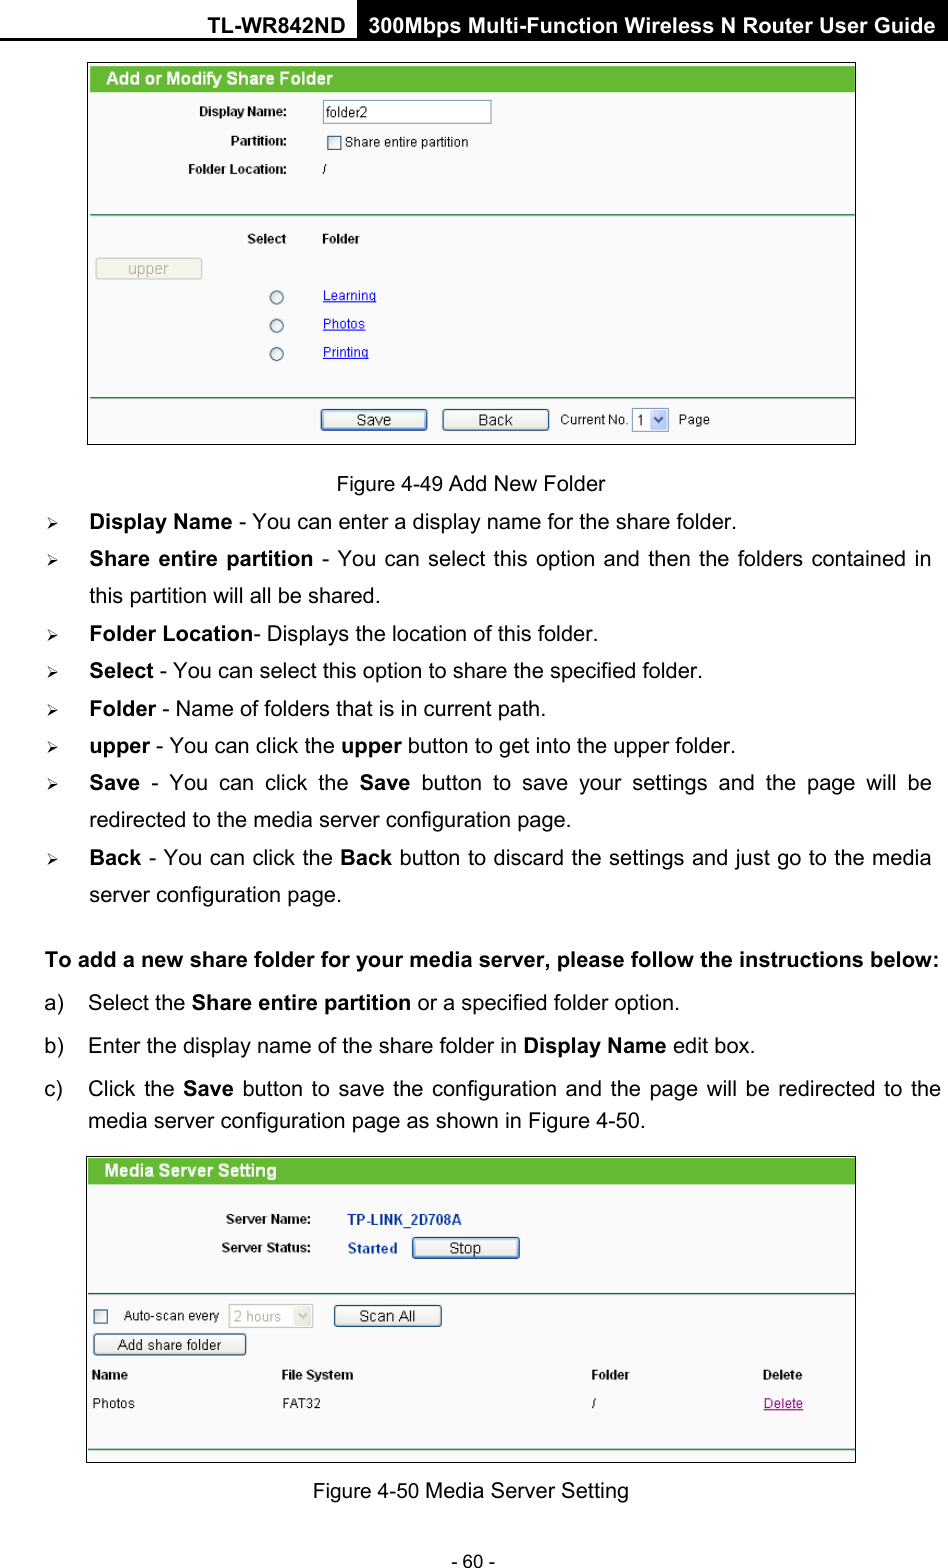 TL-WR842ND 300Mbps Multi-Function Wireless N Router User Guide  - 60 -  Figure 4-49 Add New Folder  Display Name - You can enter a display name for the share folder.  Share entire partition - You can select this option and then the folders contained in this partition will all be shared.  Folder Location- Displays the location of this folder.  Select - You can select this option to share the specified folder.  Folder - Name of folders that is in current path.  upper - You can click the upper button to get into the upper folder.  Save  -  You can click the Save button to save your settings and the  page will be redirected to the media server configuration page.  Back - You can click the Back button to discard the settings and just go to the media server configuration page. To add a new share folder for your media server, please follow the instructions below:   a) Select the Share entire partition or a specified folder option.   b) Enter the display name of the share folder in Display Name edit box.   c) Click the Save button to save the configuration and  the page will be redirected to the media server configuration page as shown in Figure 4-50.    Figure 4-50 Media Server Setting 